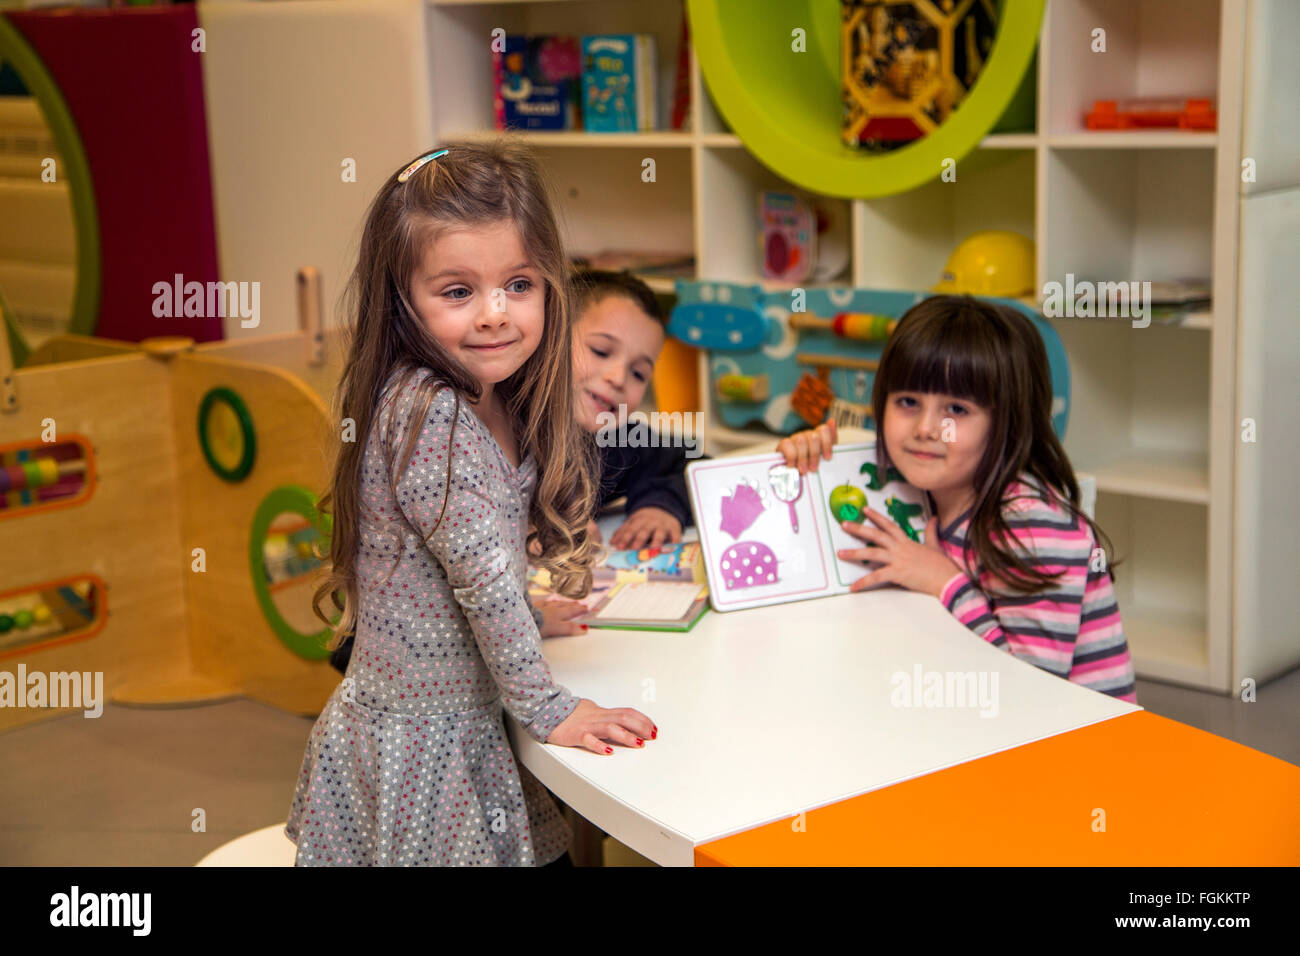 Children in the playroom Stock Photo